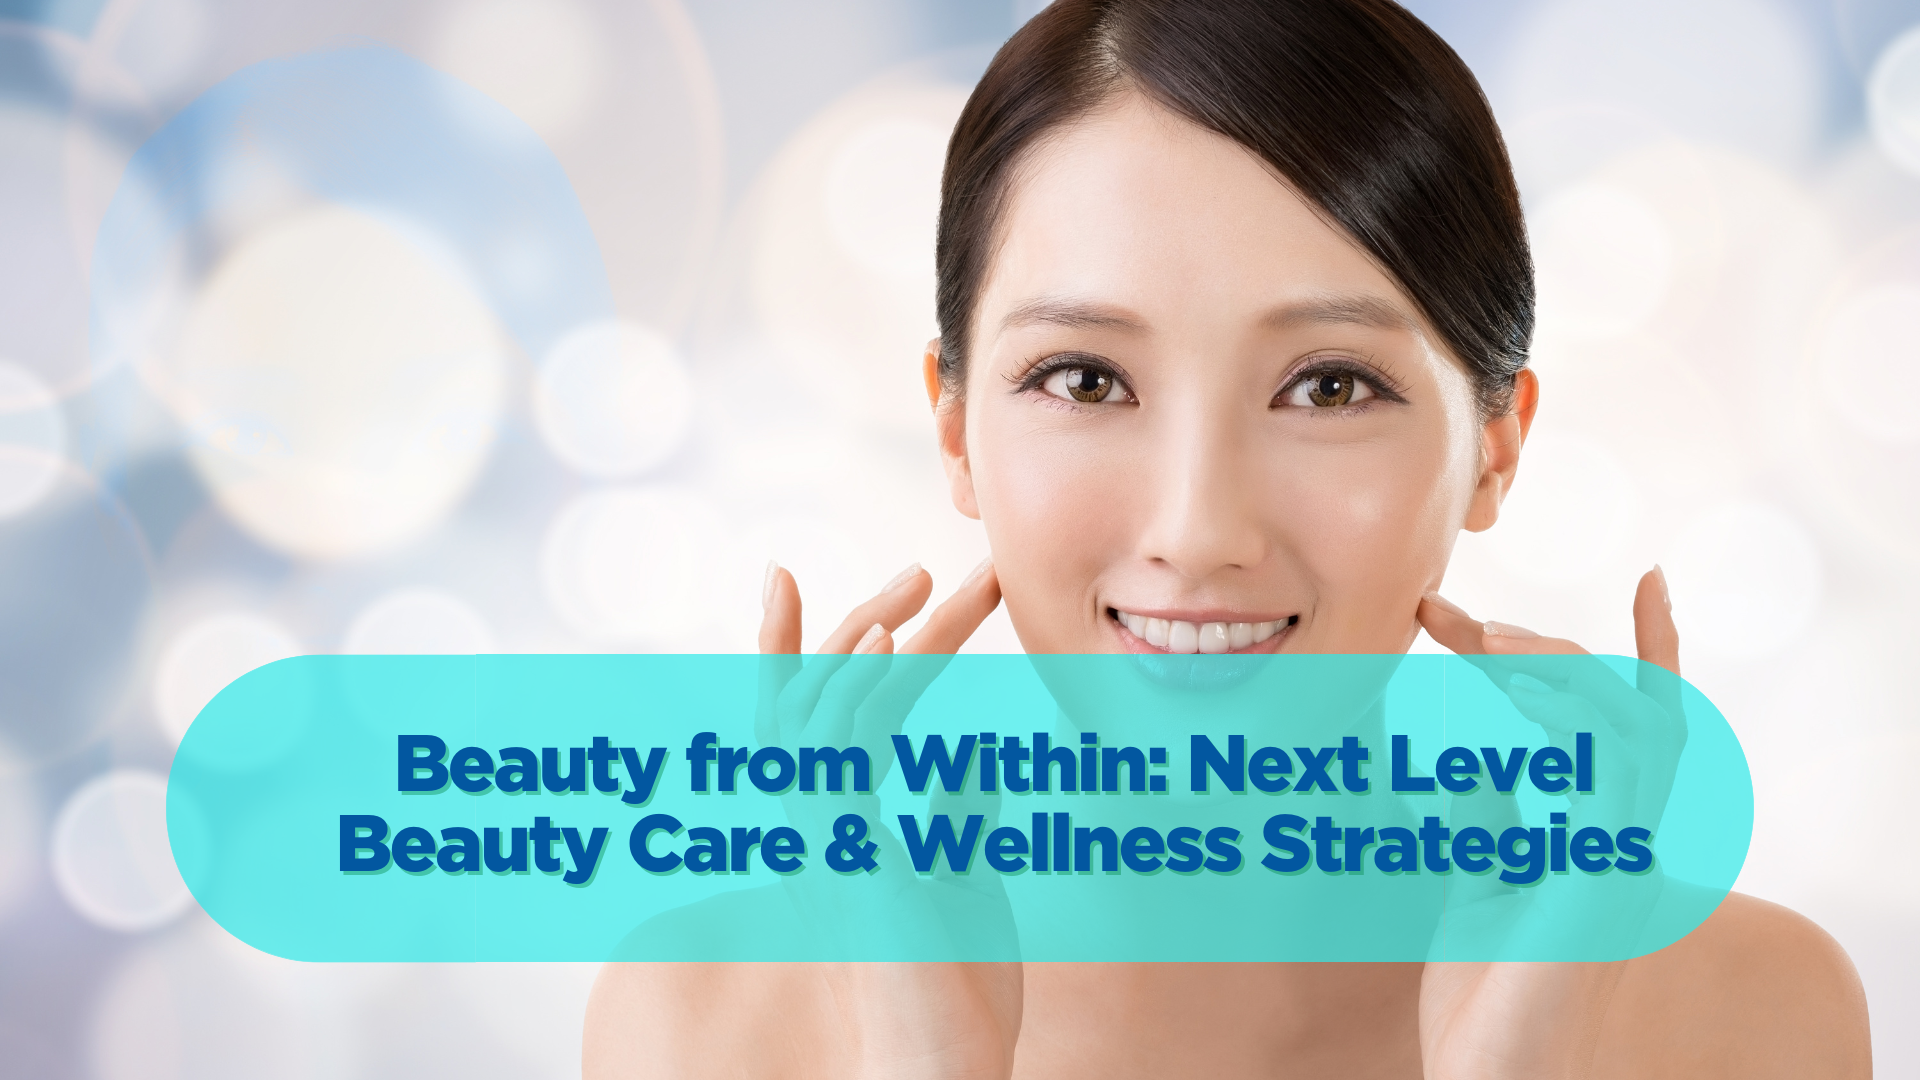 Beauty from Within: Next Level Beauty Care & Wellness Strategies